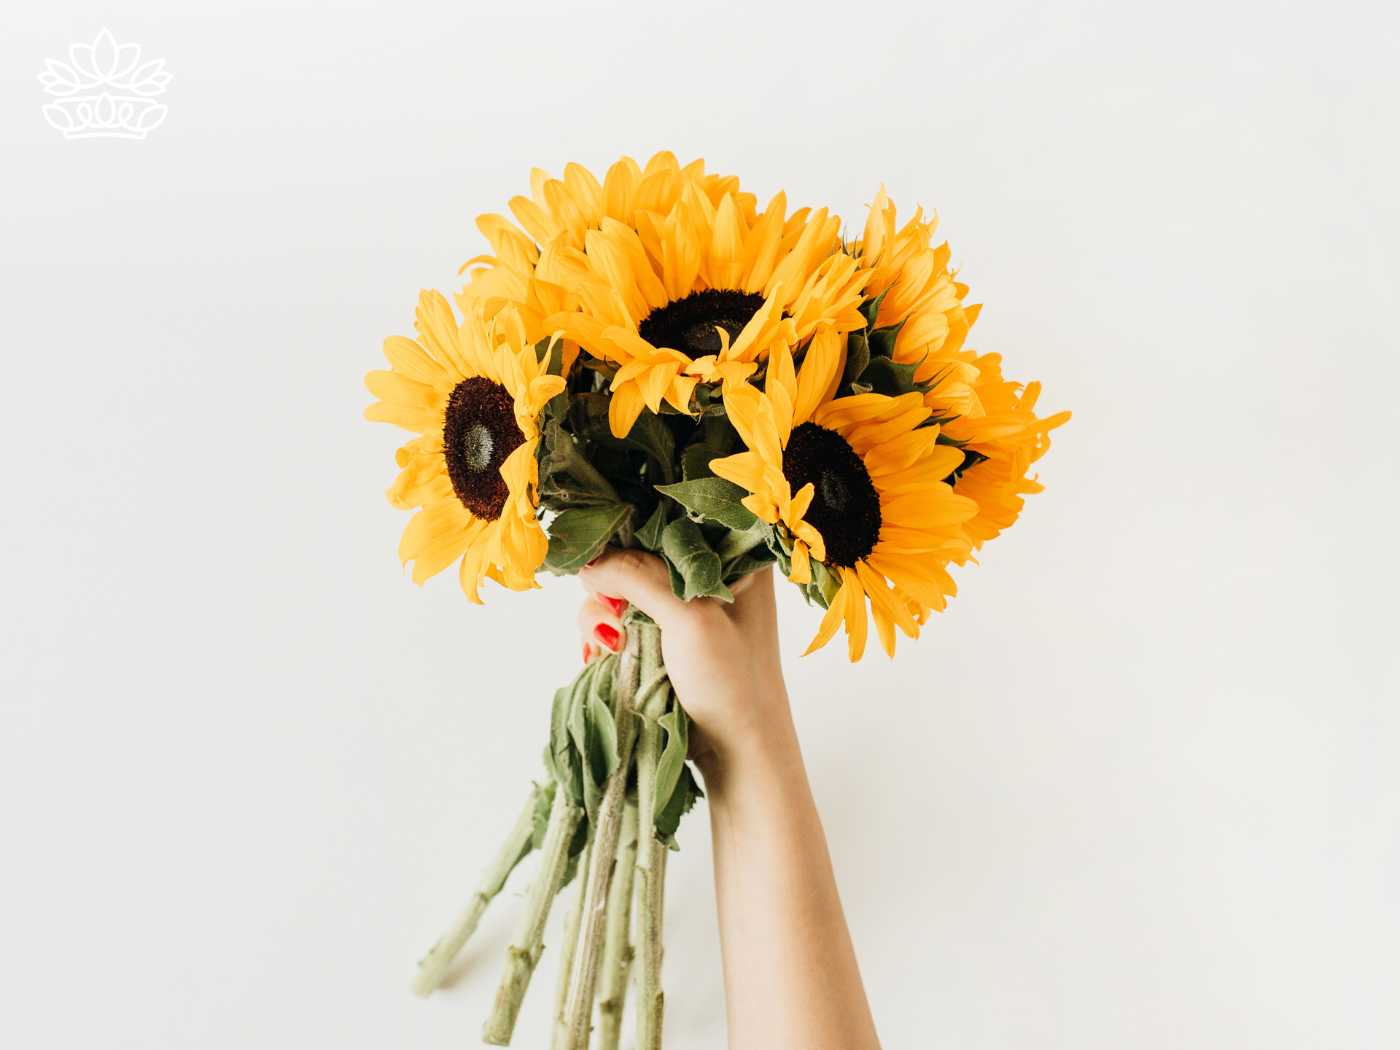 A hand holding a vibrant sunflower bouquet against a plain white background, showcasing beautiful flowers from the Sunflowers Collection by Fabulous Flowers and Gifts. Visit our shop to view and send these exquisite sunflower bouquets.